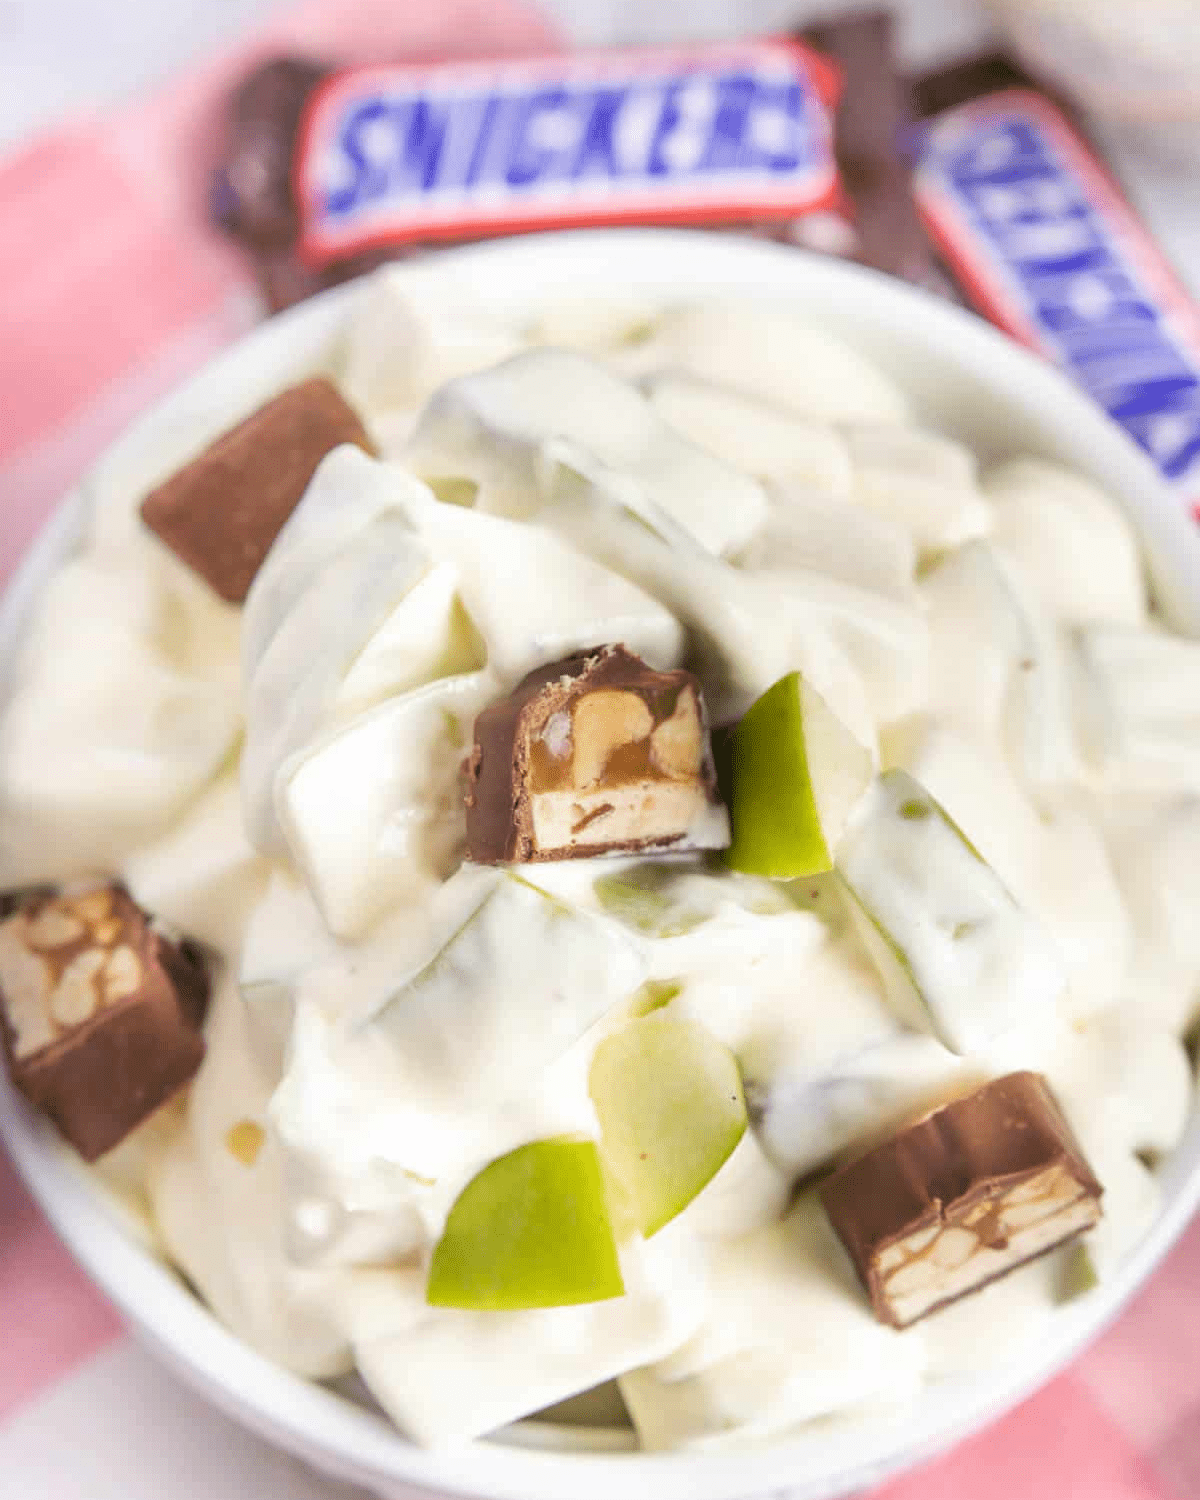 Snickers salad with apples and mini candy bars
